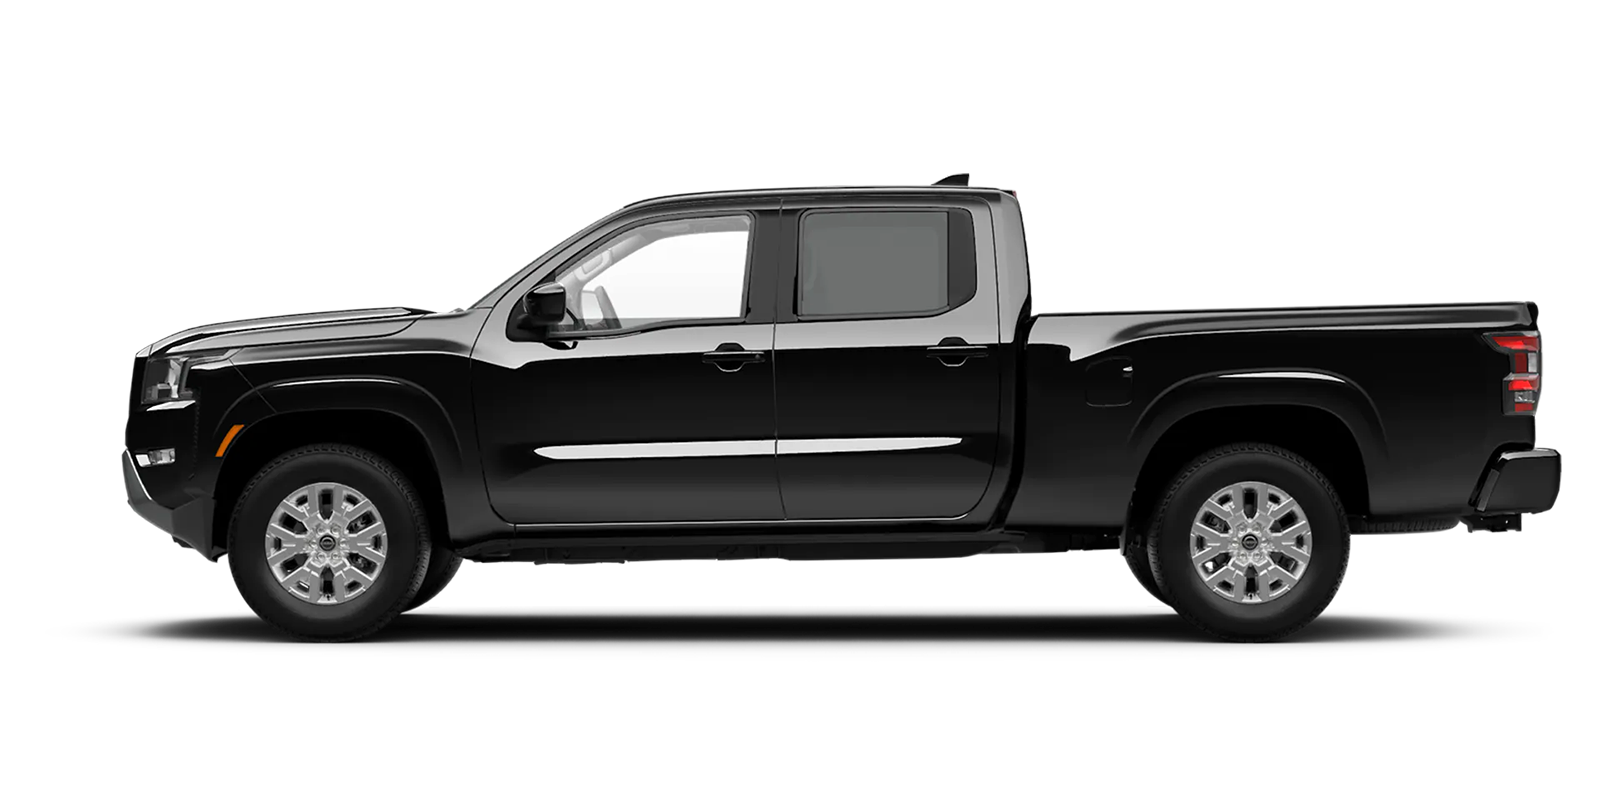 2022 Frontier Crew Cab Long Bed SV 4x2 in Super Black | King Windward Nissan in Kaneohe HI